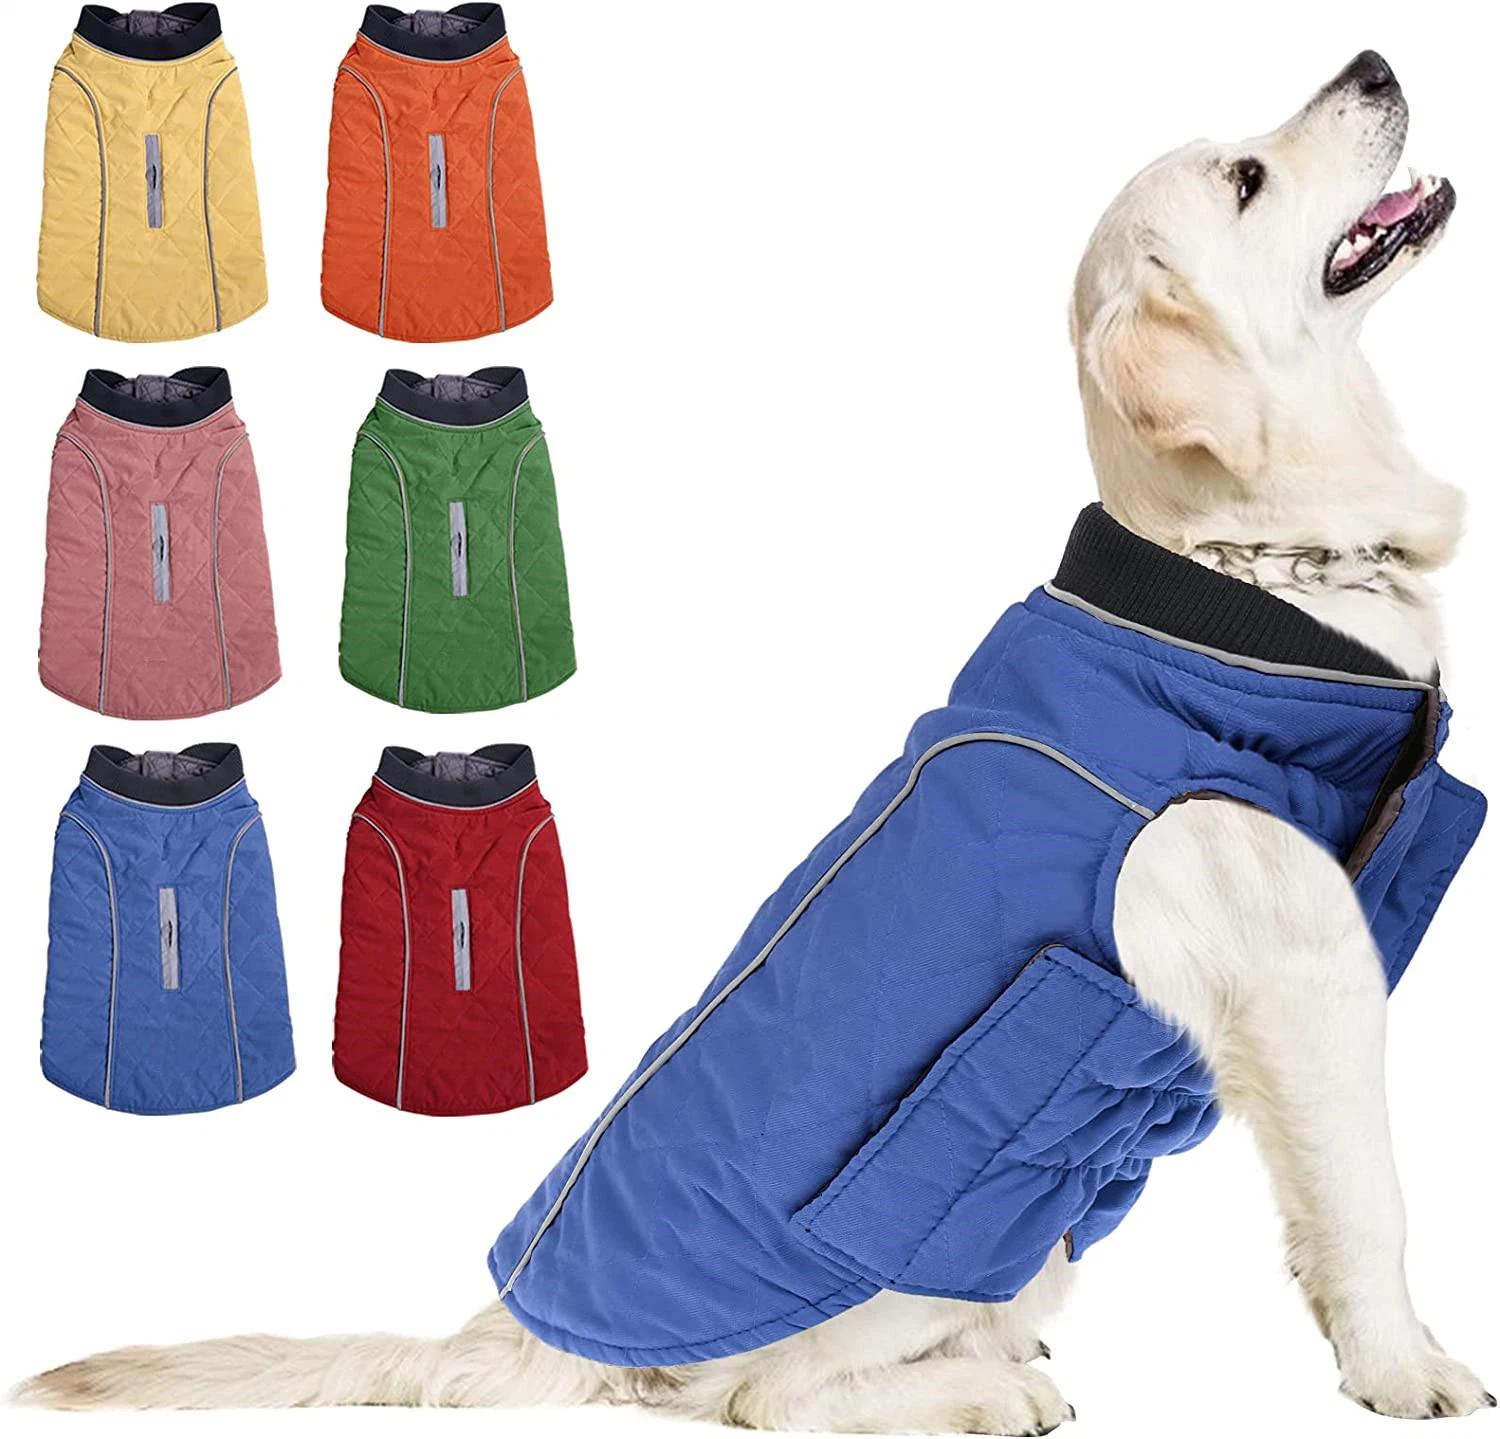 Windproof Dog Cold Weather Coat, Reflective Pet Winter Thick Warm Outdoor Jacket